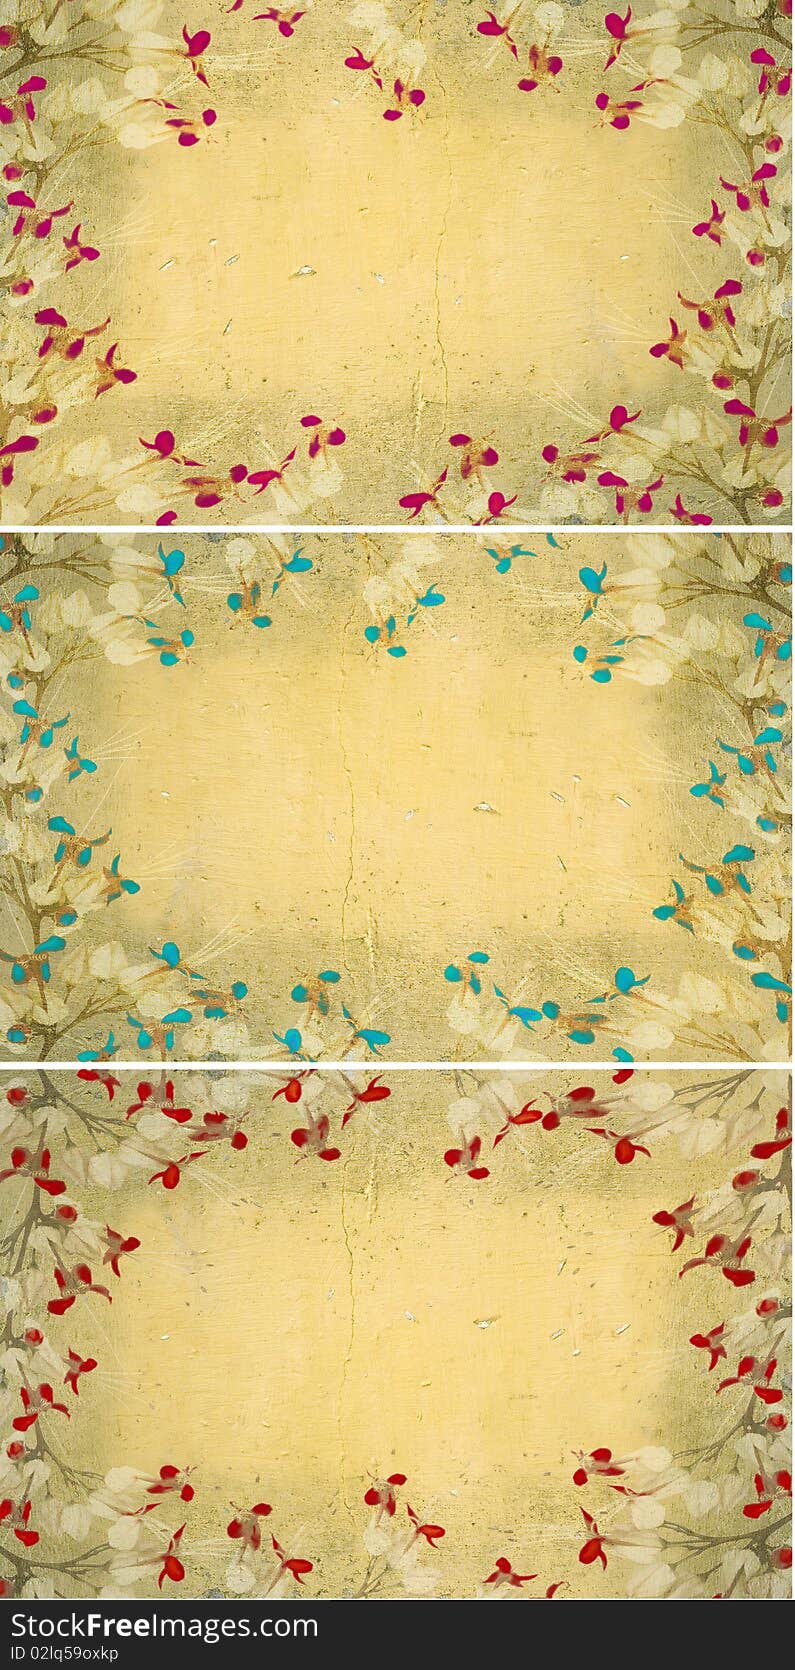 Butterfly flower frames on light grunge wall collection. Butterfly flower frames on light grunge wall collection